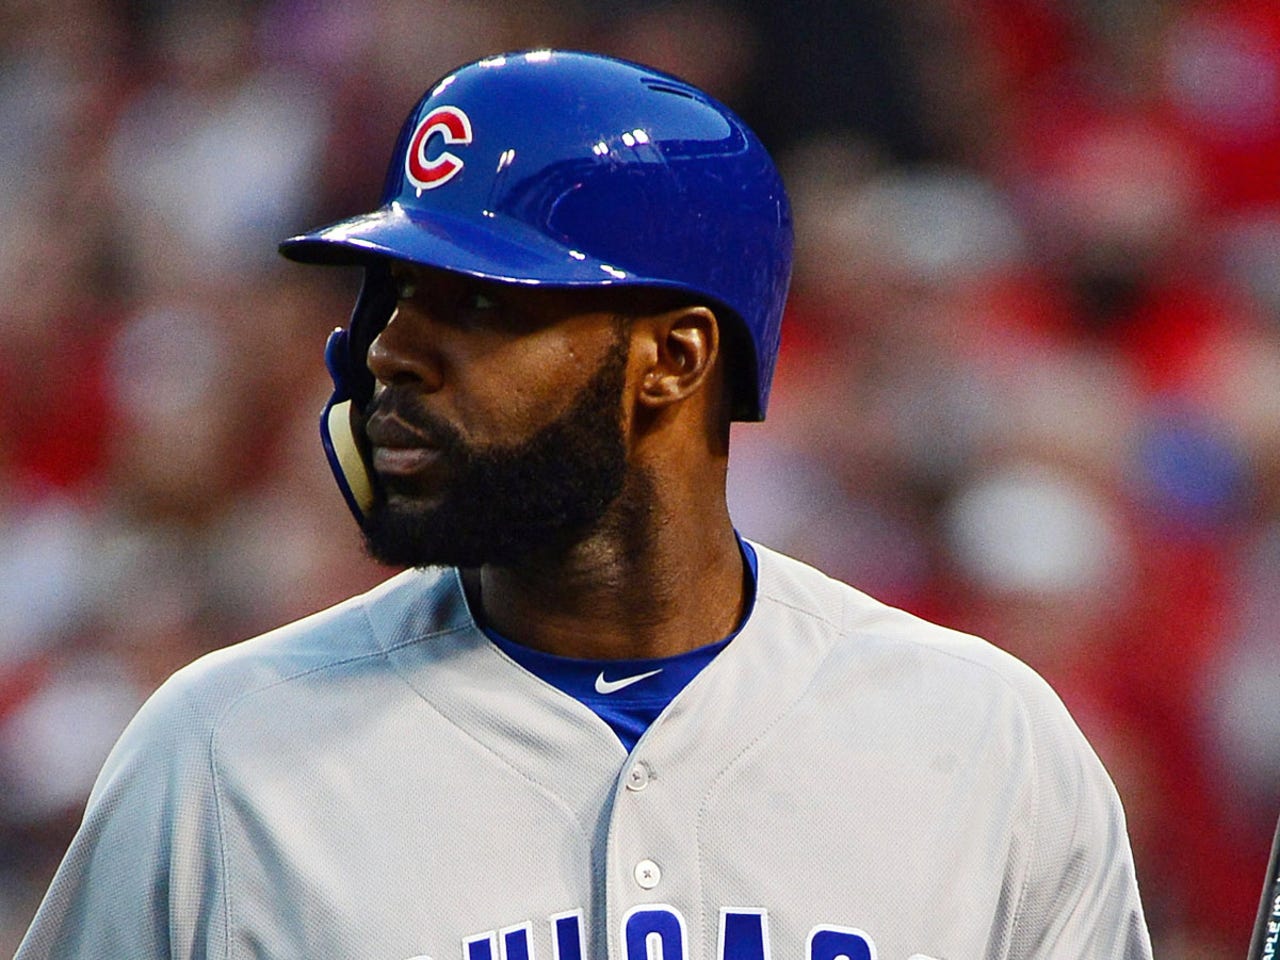 Jason Heyward signs with Cubs, Cardinals fans are not happy